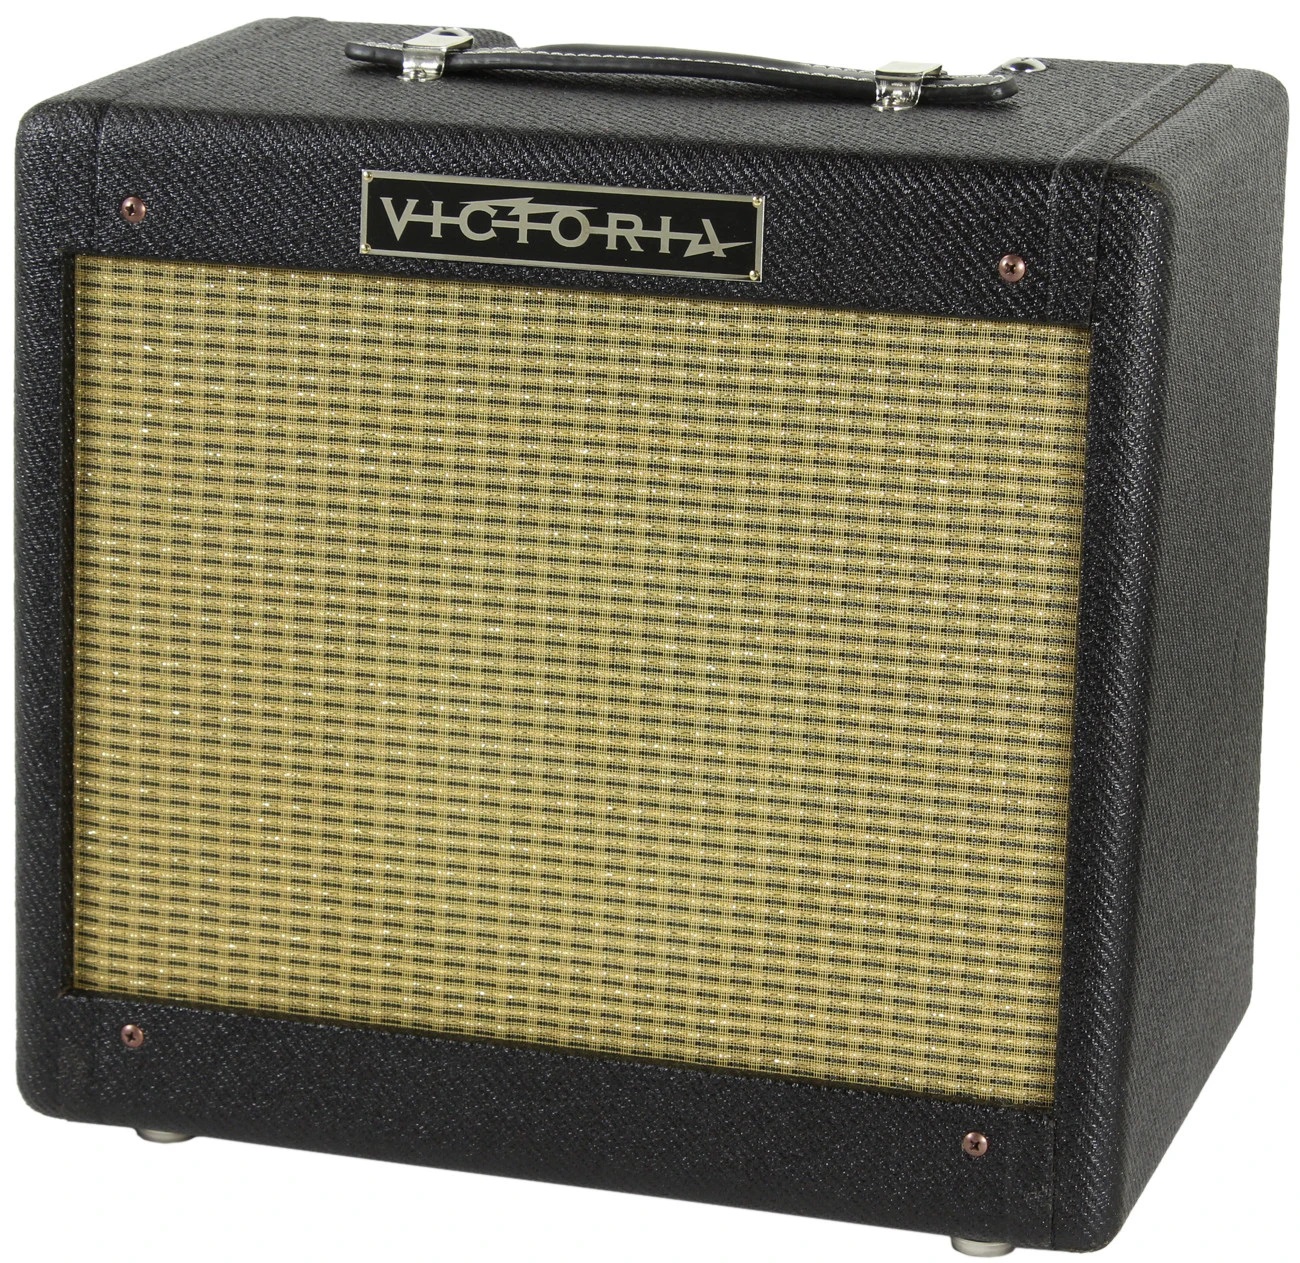 Some very cool new amps coming from Fender.-victoria-518-black-tweed-main_2048x2048-jpg